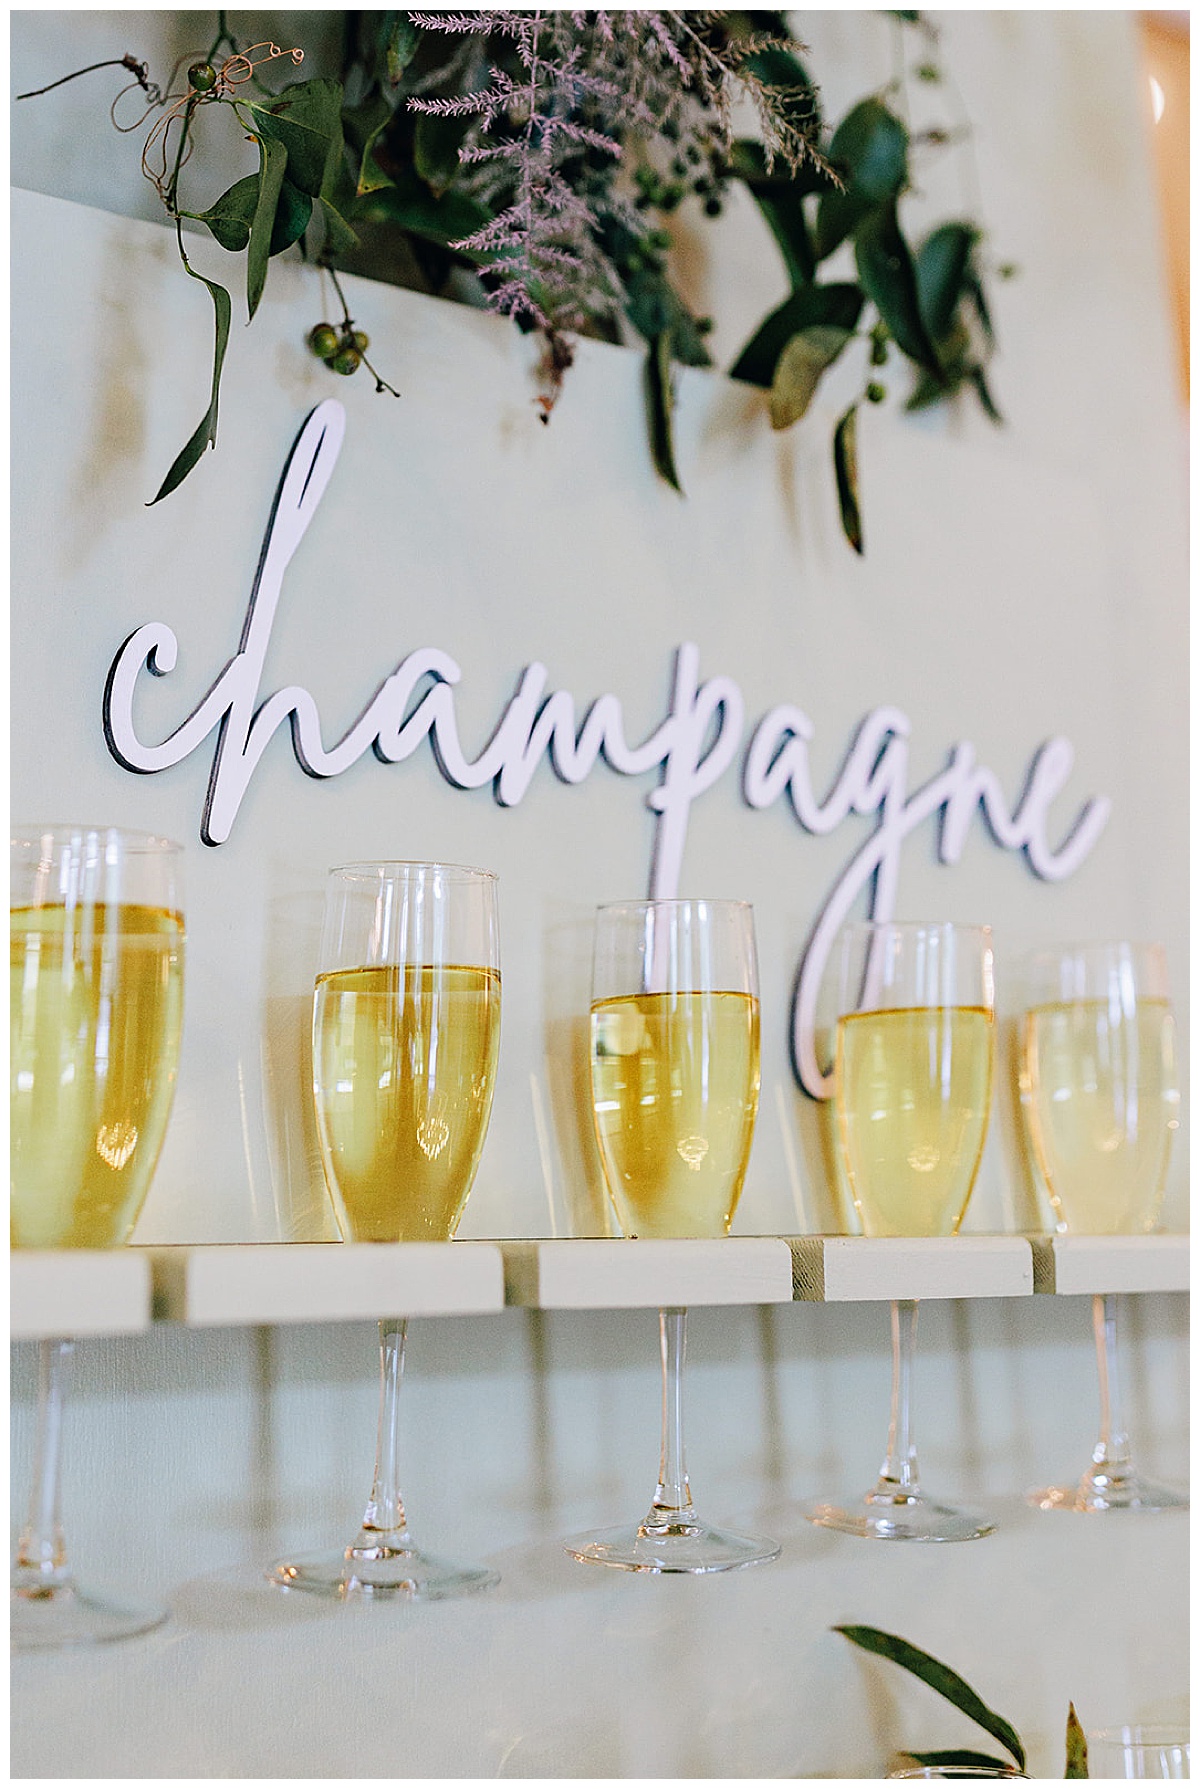 Dont forget to Back Up & Store Your Wedding Photos to preserve memories of your champagne toast escort glasses